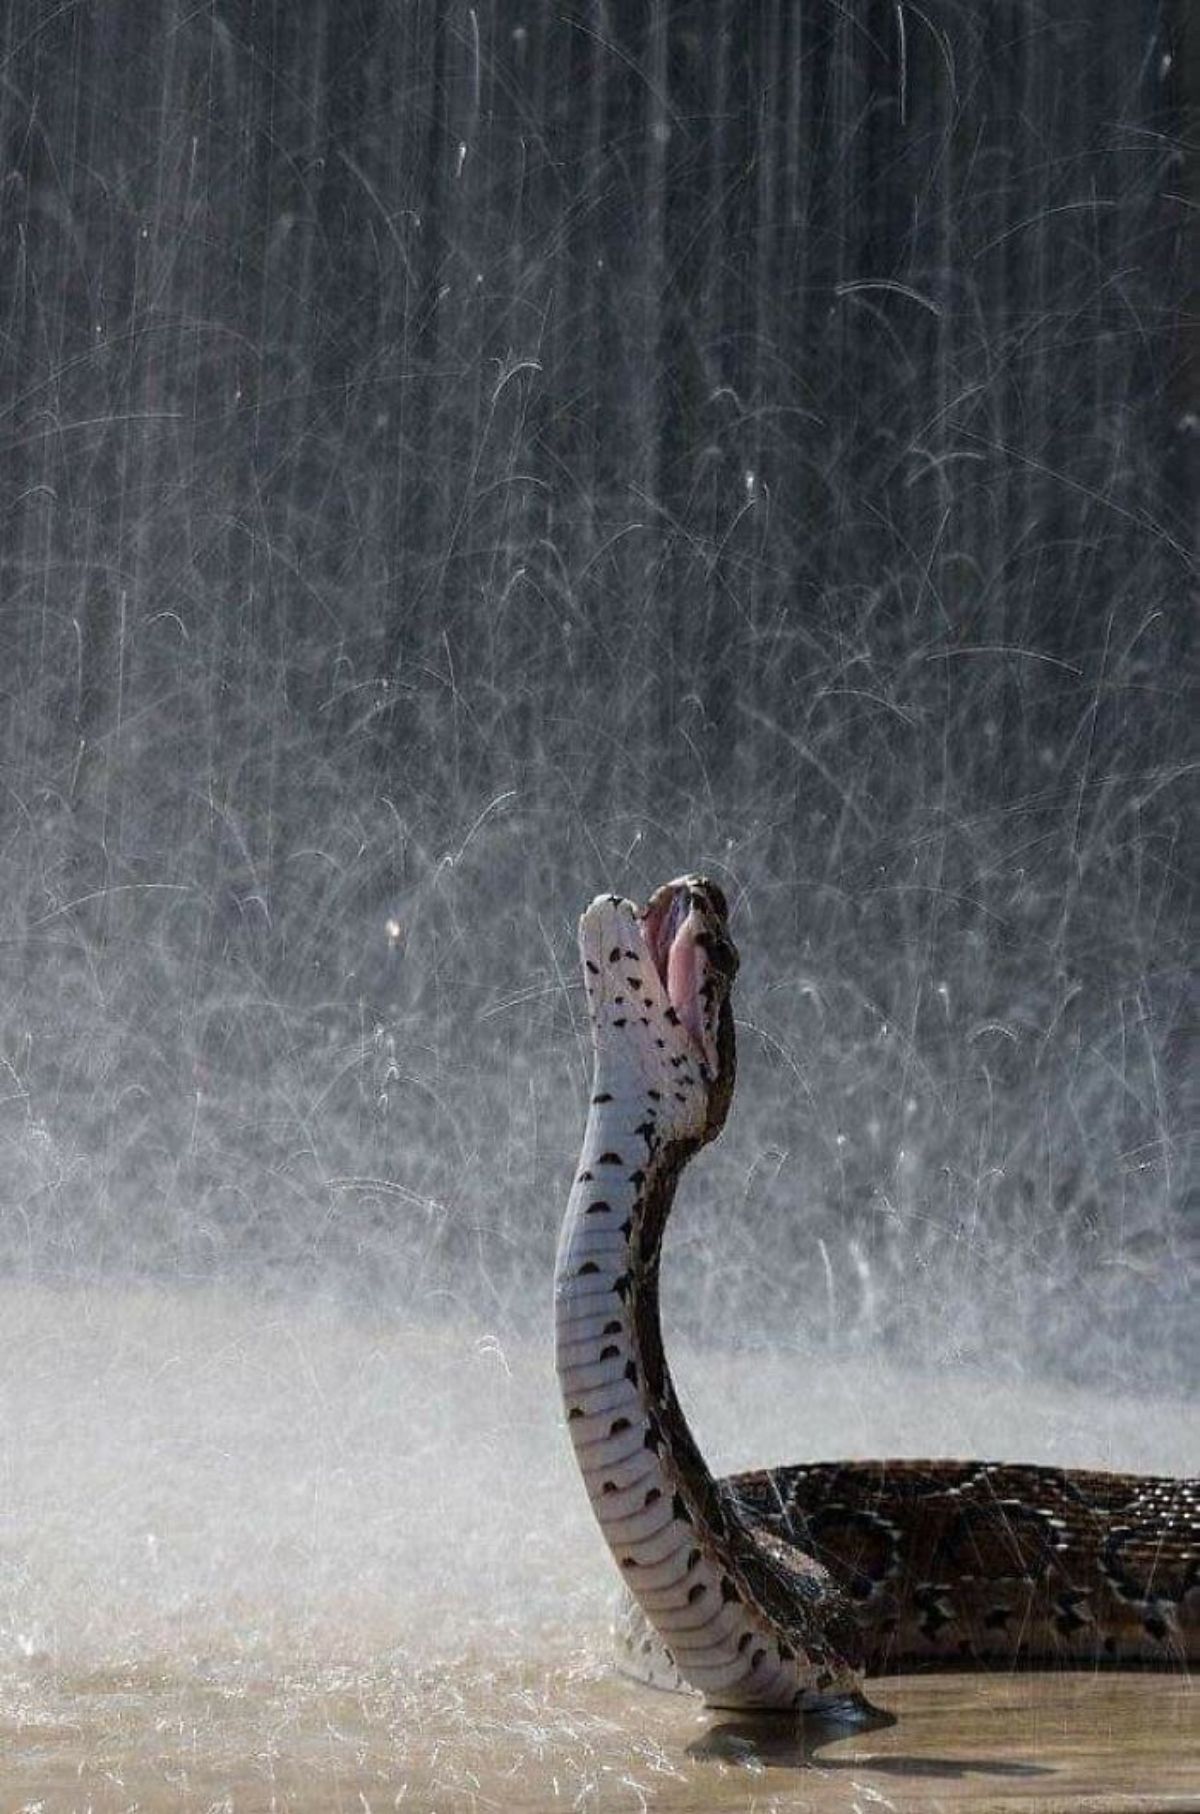 black and white serpent with part of its body reaching up with the mouth open in the rain